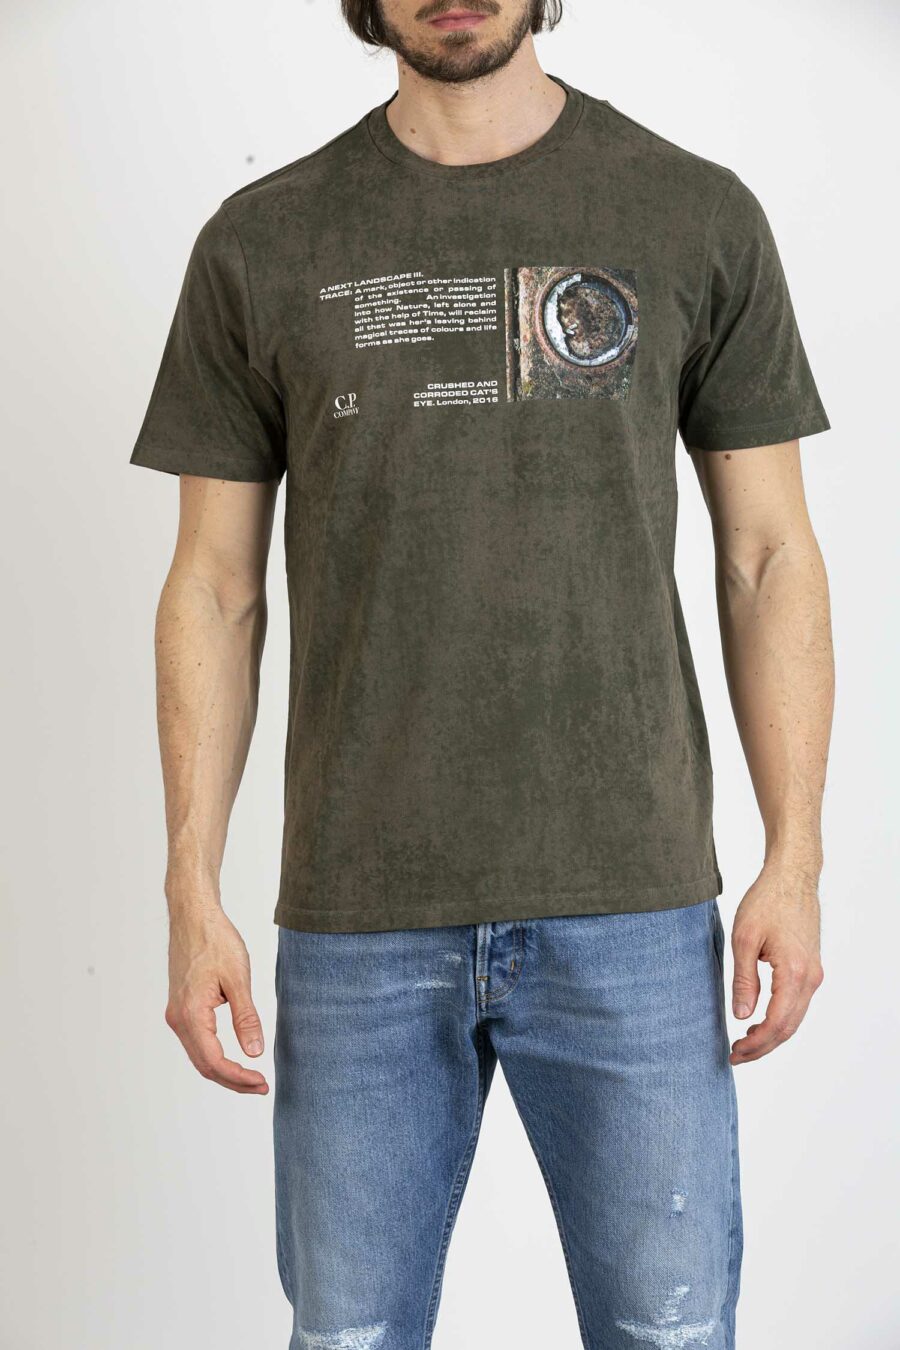 CP COMPANY-T-SHIRT IN JERSEY TREATED NEXT LANDSCAPE VISUAL-CPTS247A005431H TREATMENT